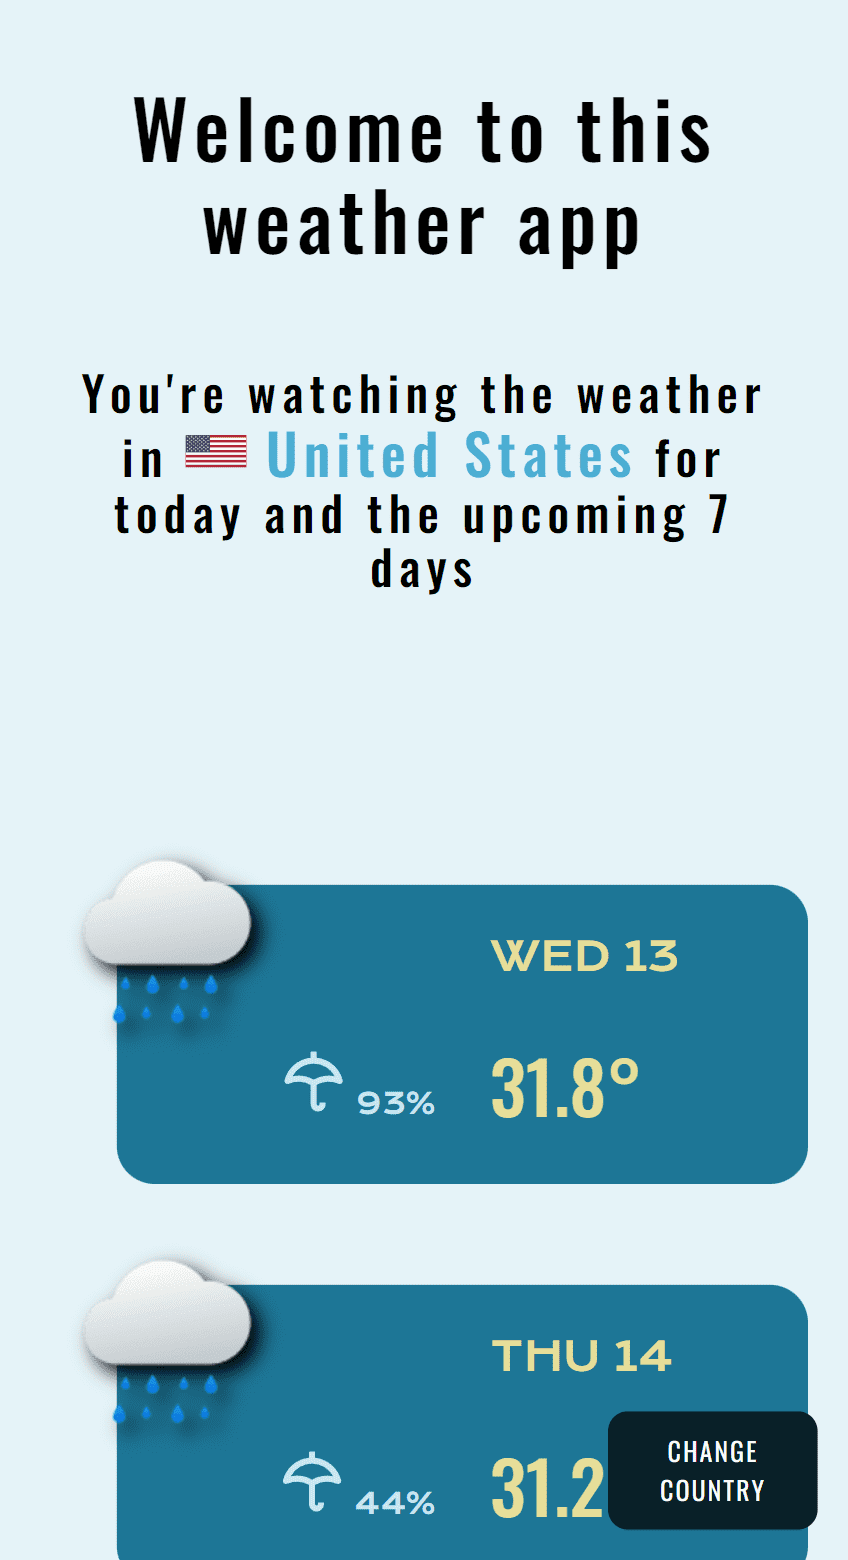 weather app for mobile devices